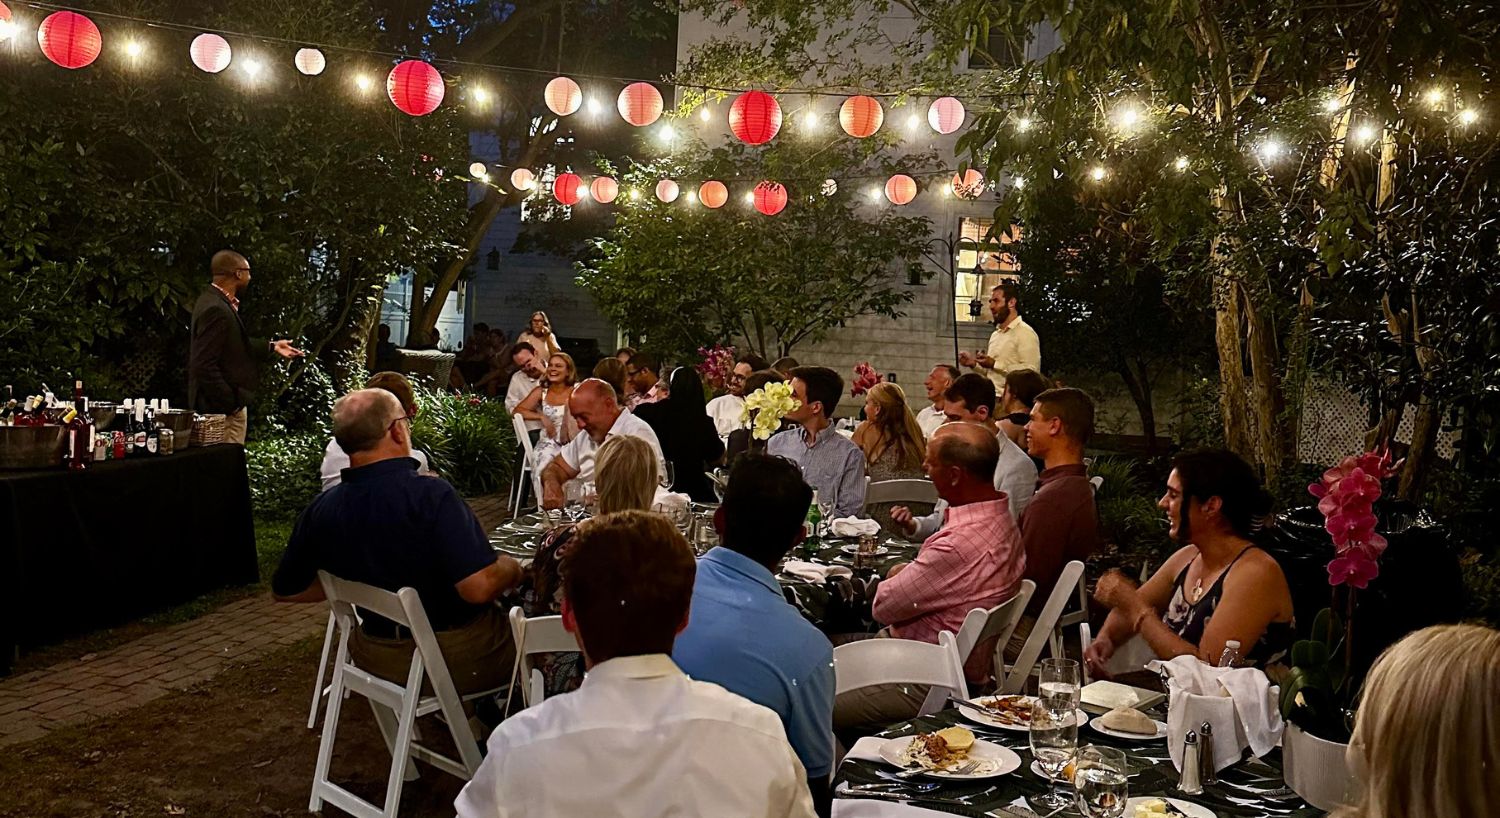 A backyard patio fill of tables of people for an event with colorful string lights hanging above